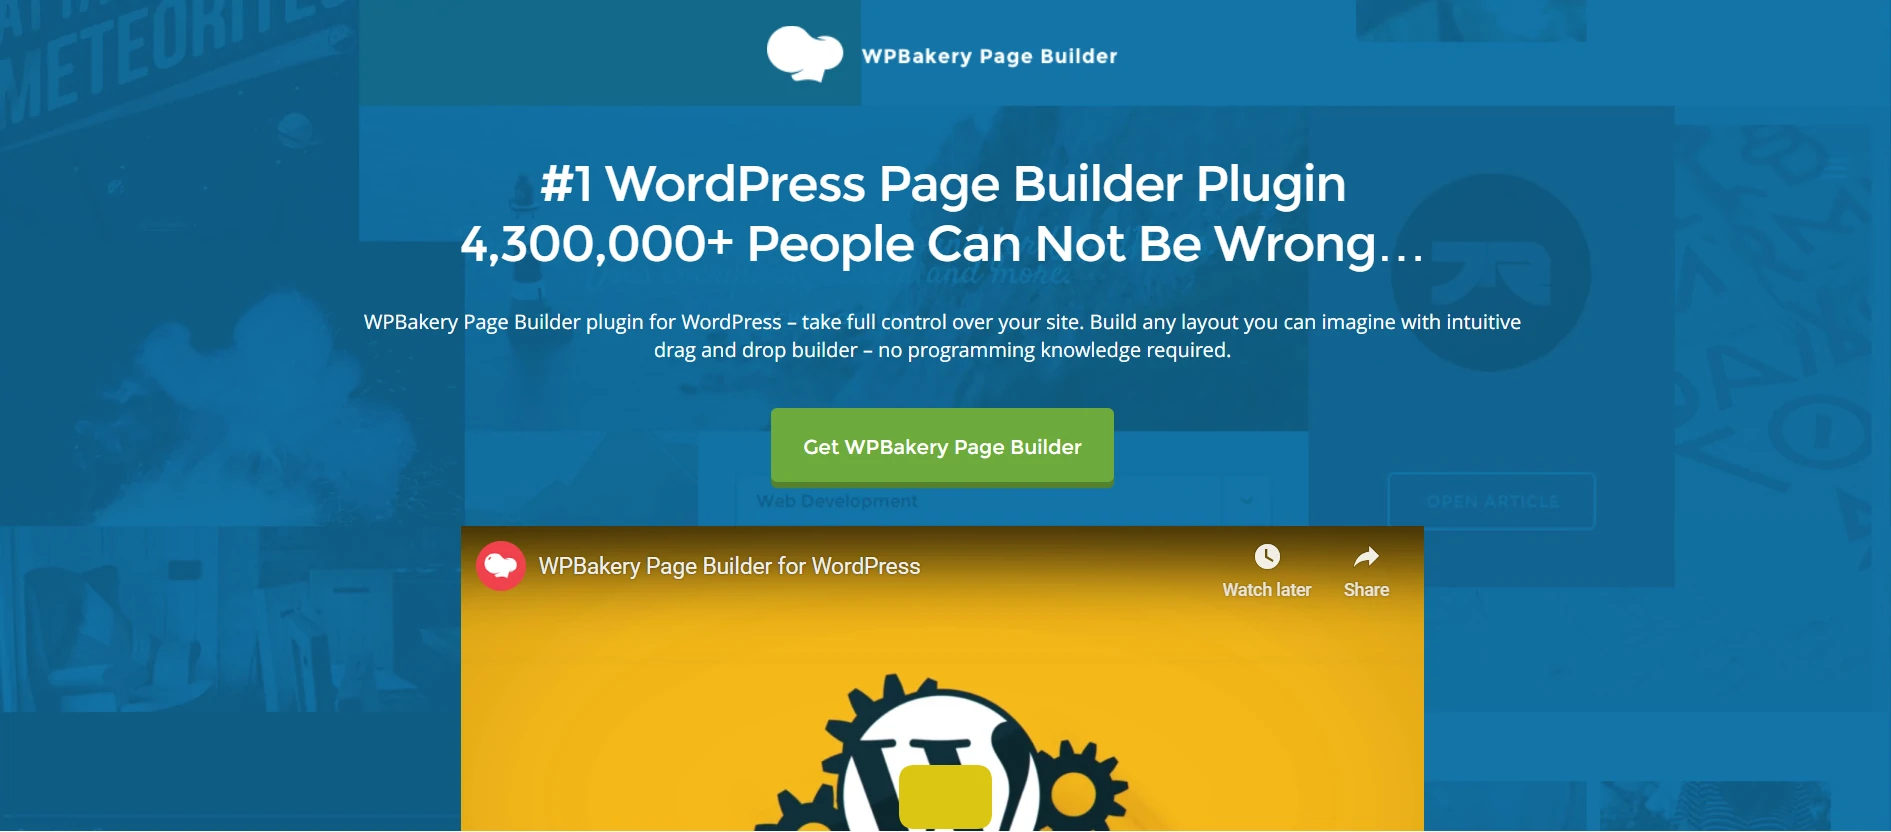 WPBakery Page Builder for WordPress